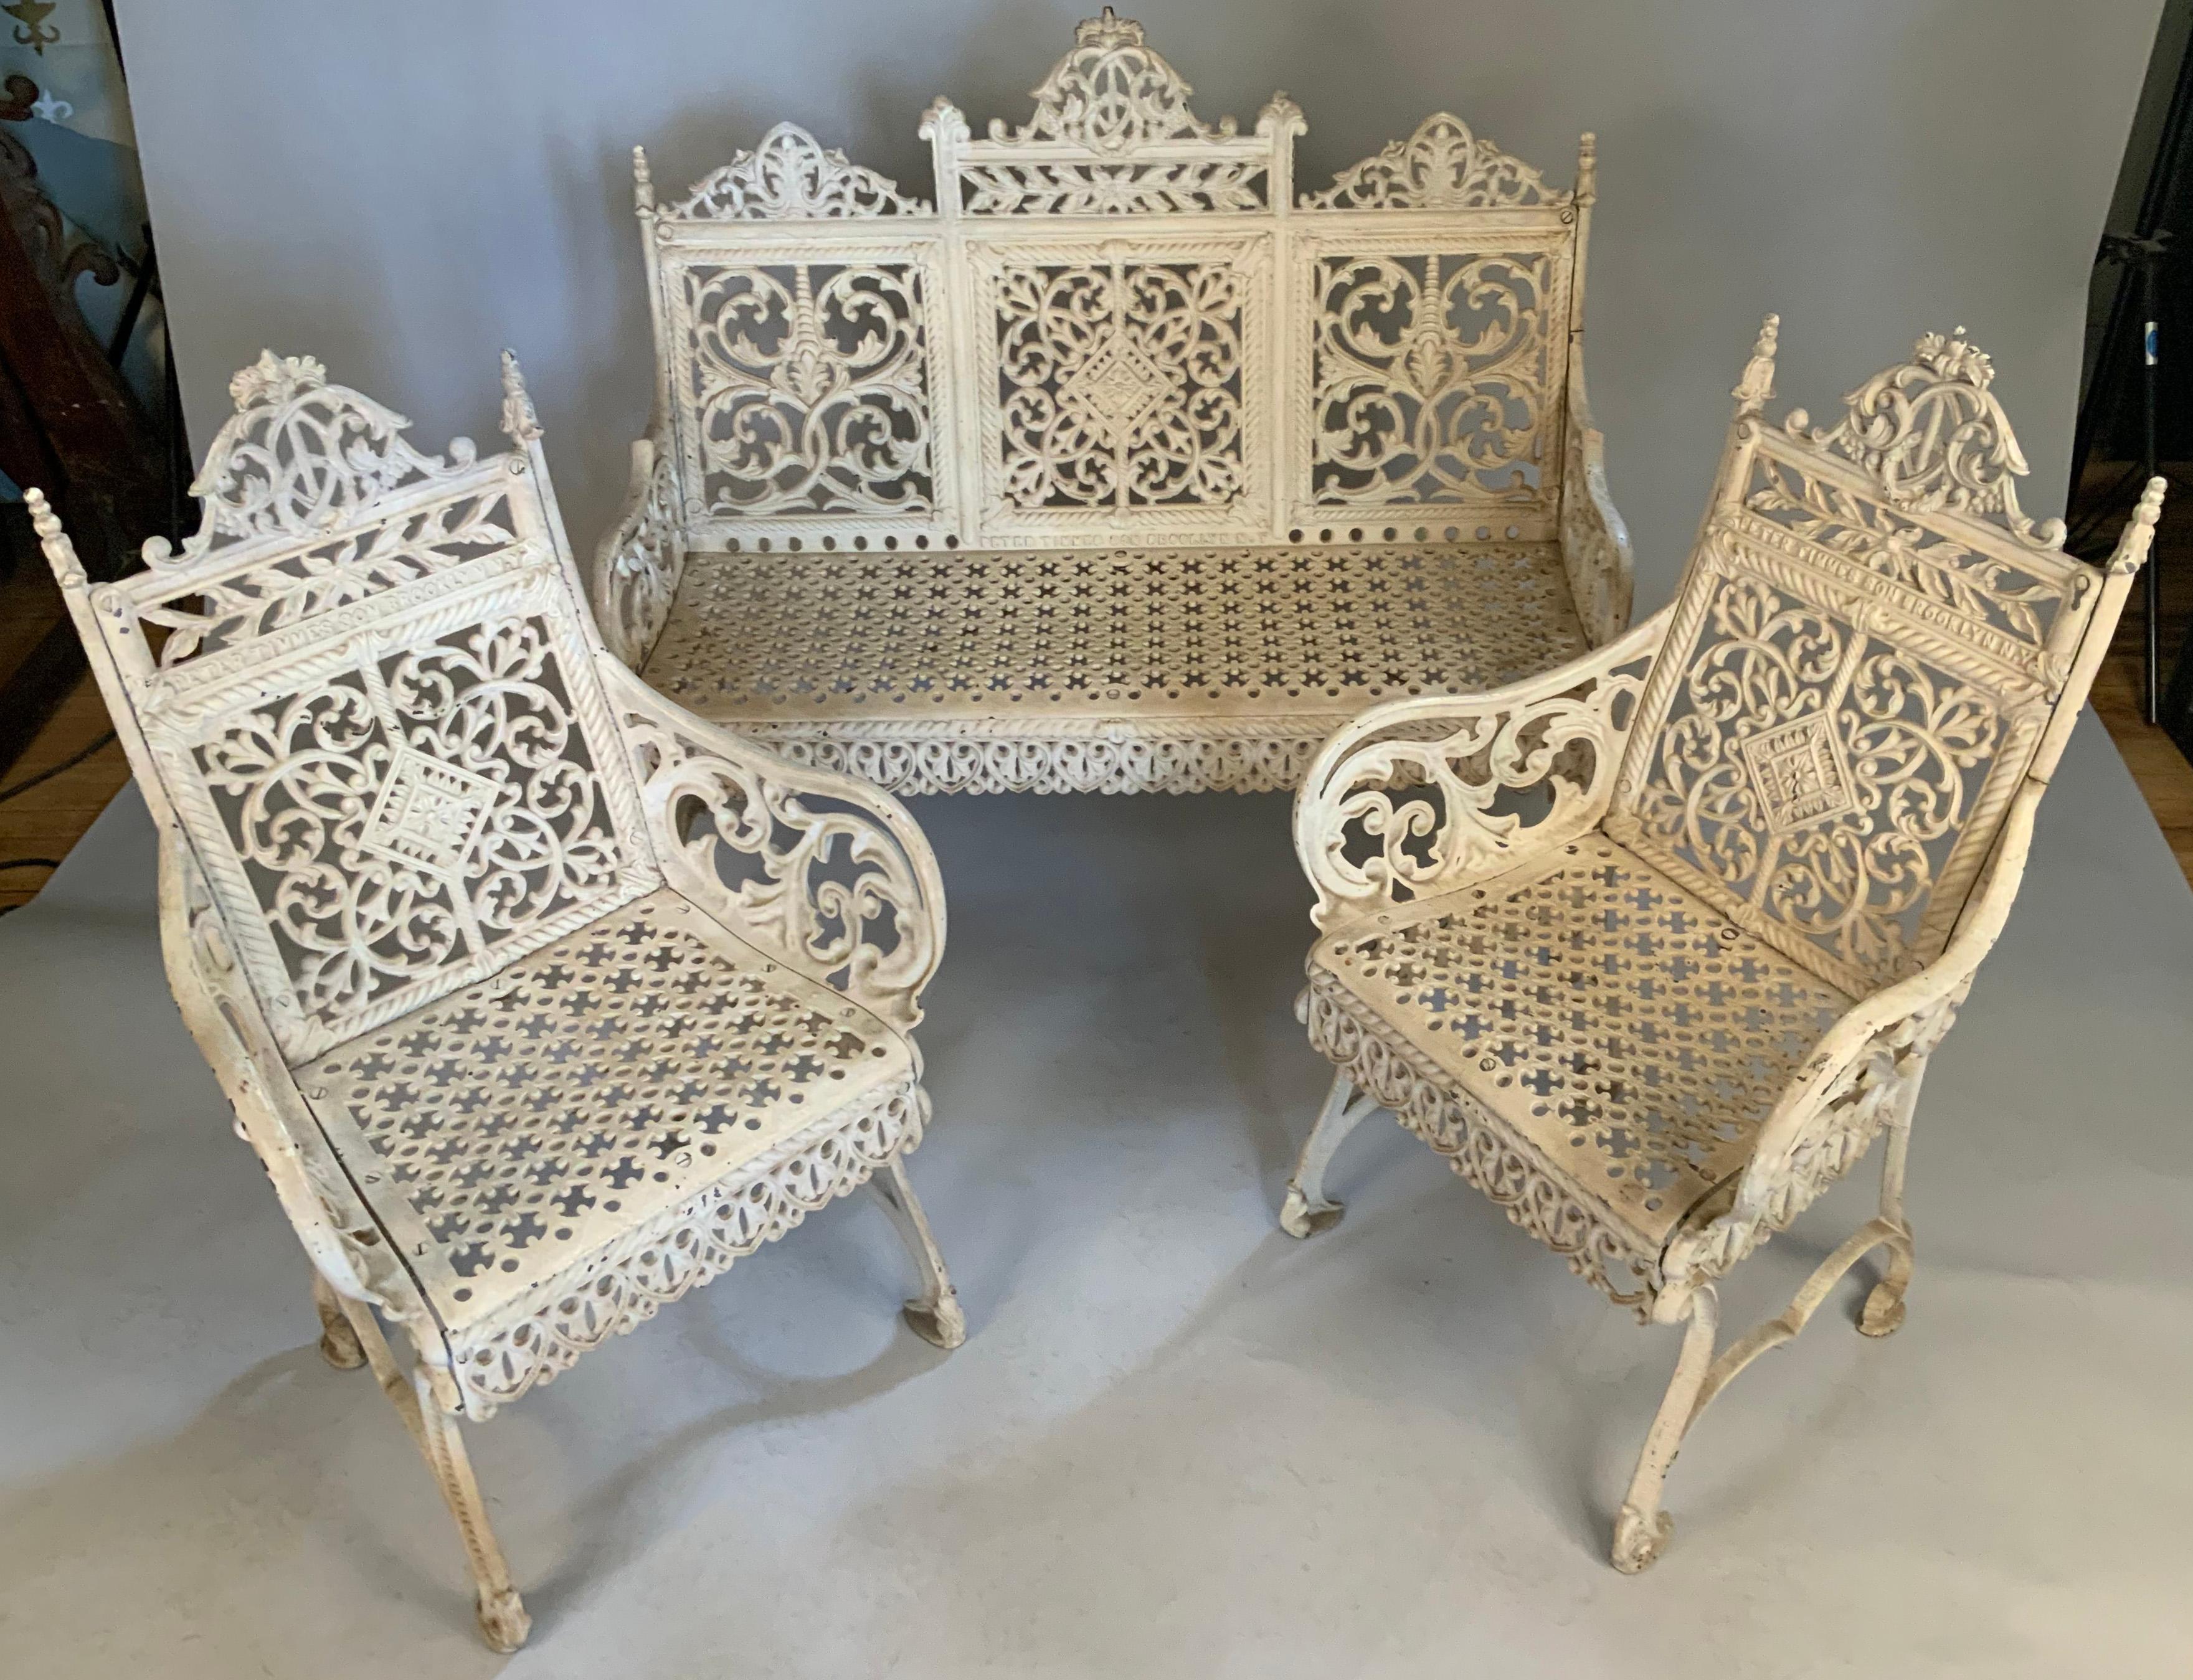 A remarkabe set of cast iron garden furniture by Peter Timmes, Brooklyn. c. late 19th century. 
The set consists of a bench and matching pair of chairs. 

Decorated with Gothic tracery patterns of scrolls and acanthus having a pierced seat.